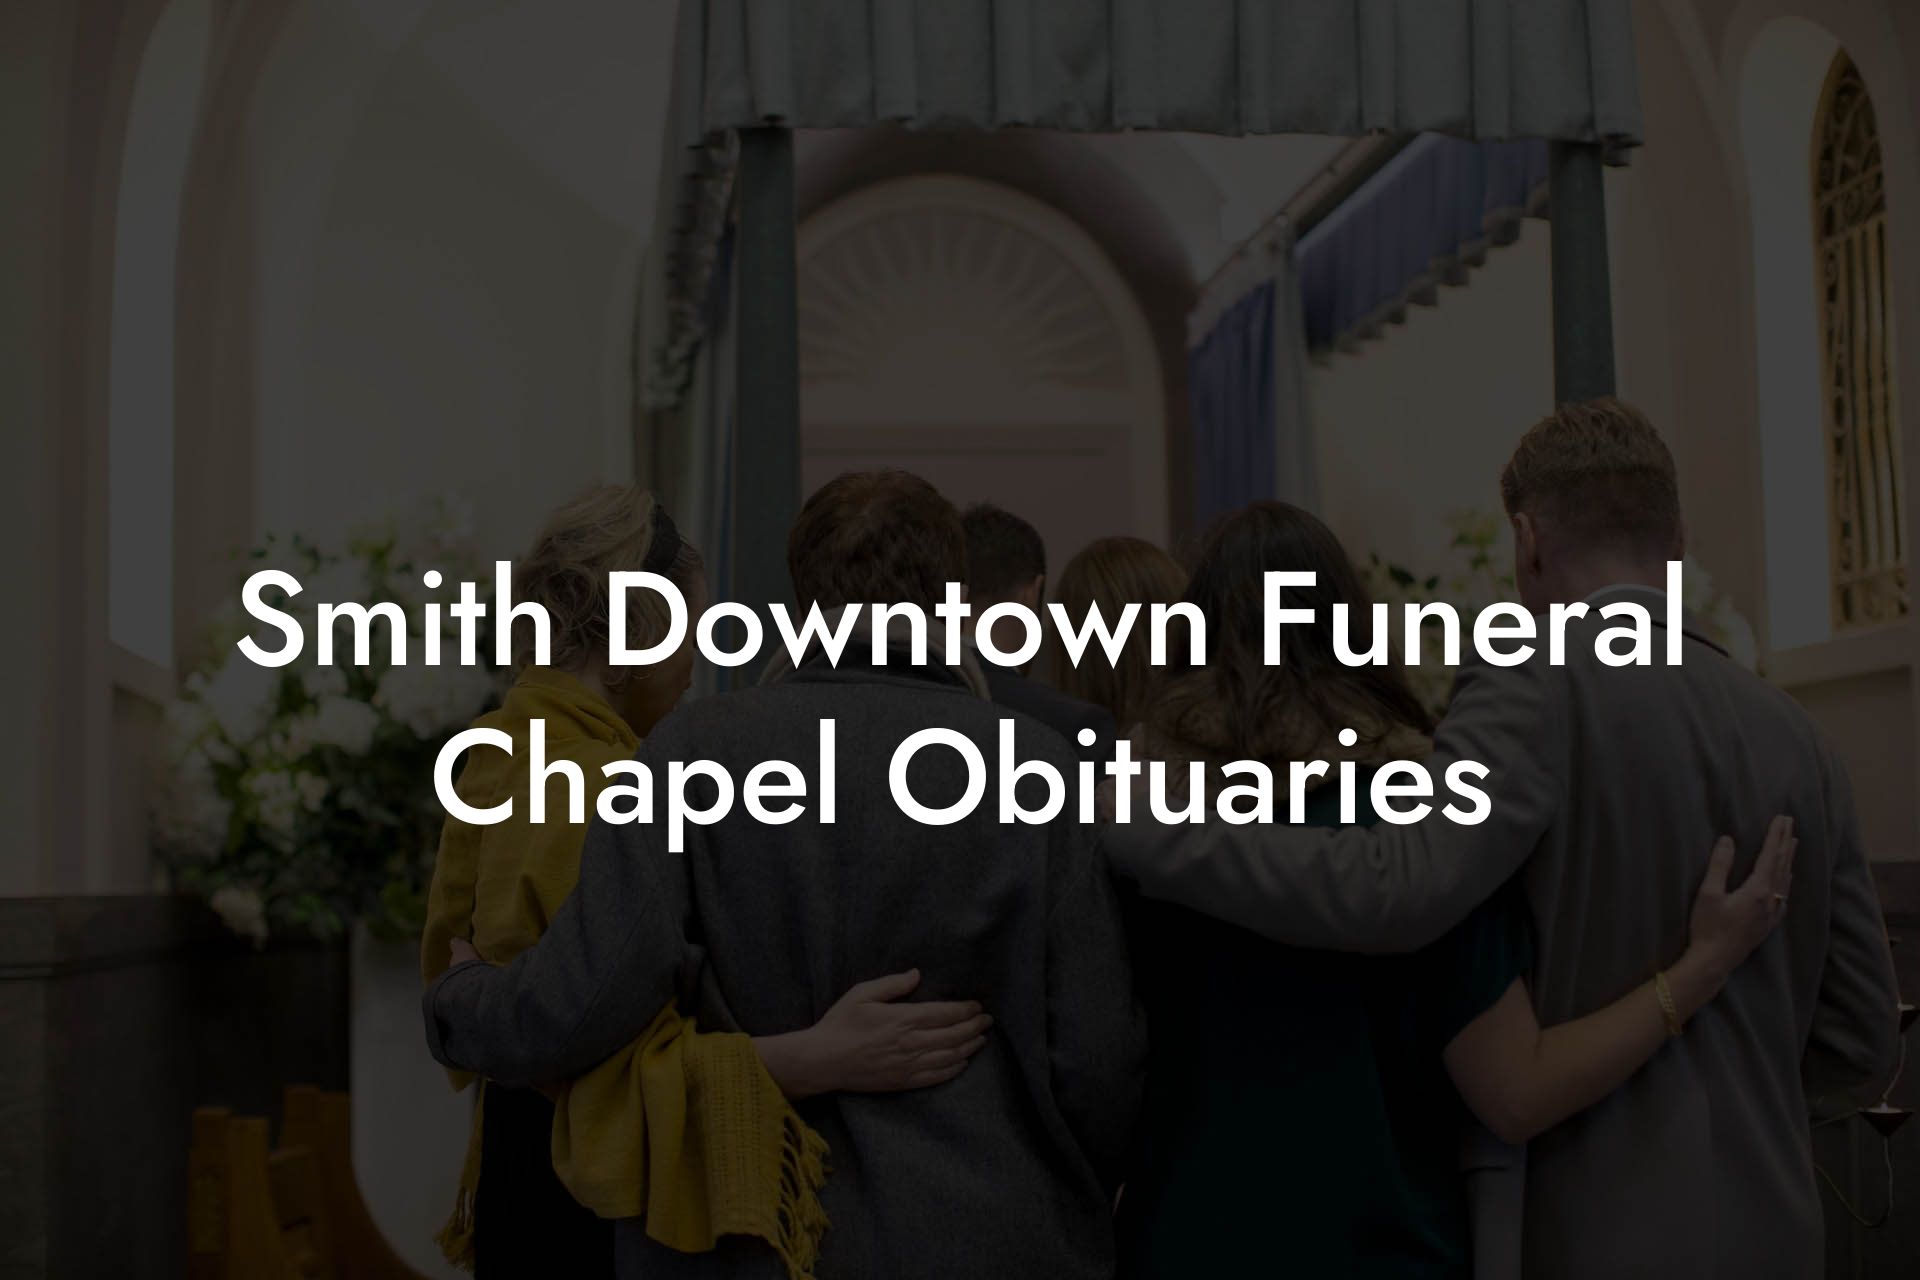 Smith Downtown Funeral Chapel Obituaries